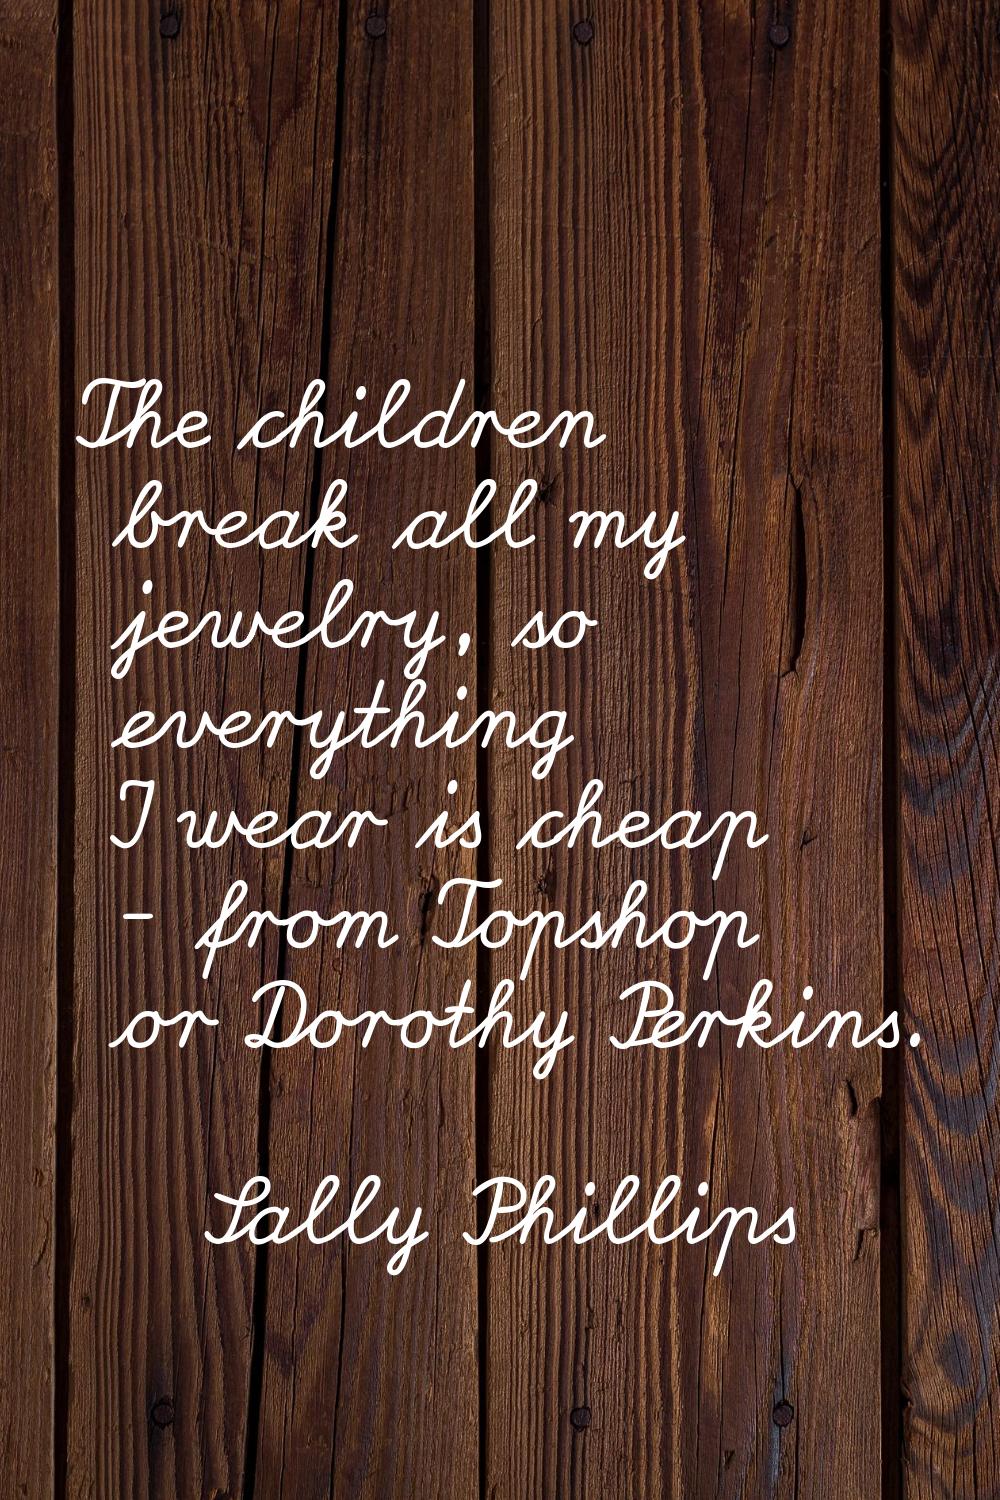 The children break all my jewelry, so everything I wear is cheap - from Topshop or Dorothy Perkins.